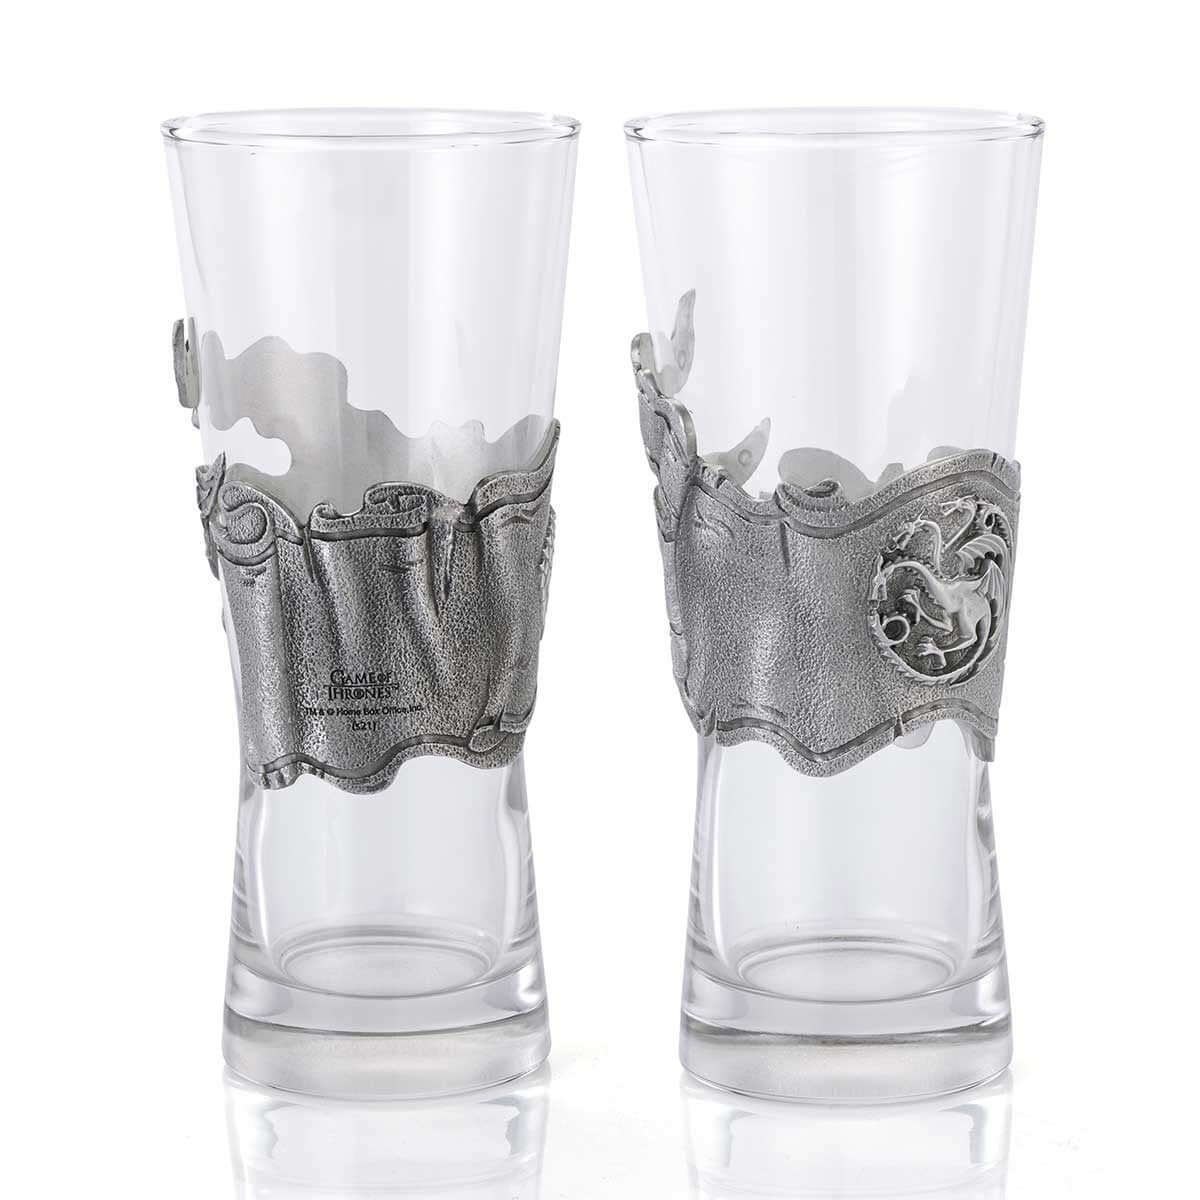 Ice & Fire Pilsner Pair - Game of Thrones Collectible Gift